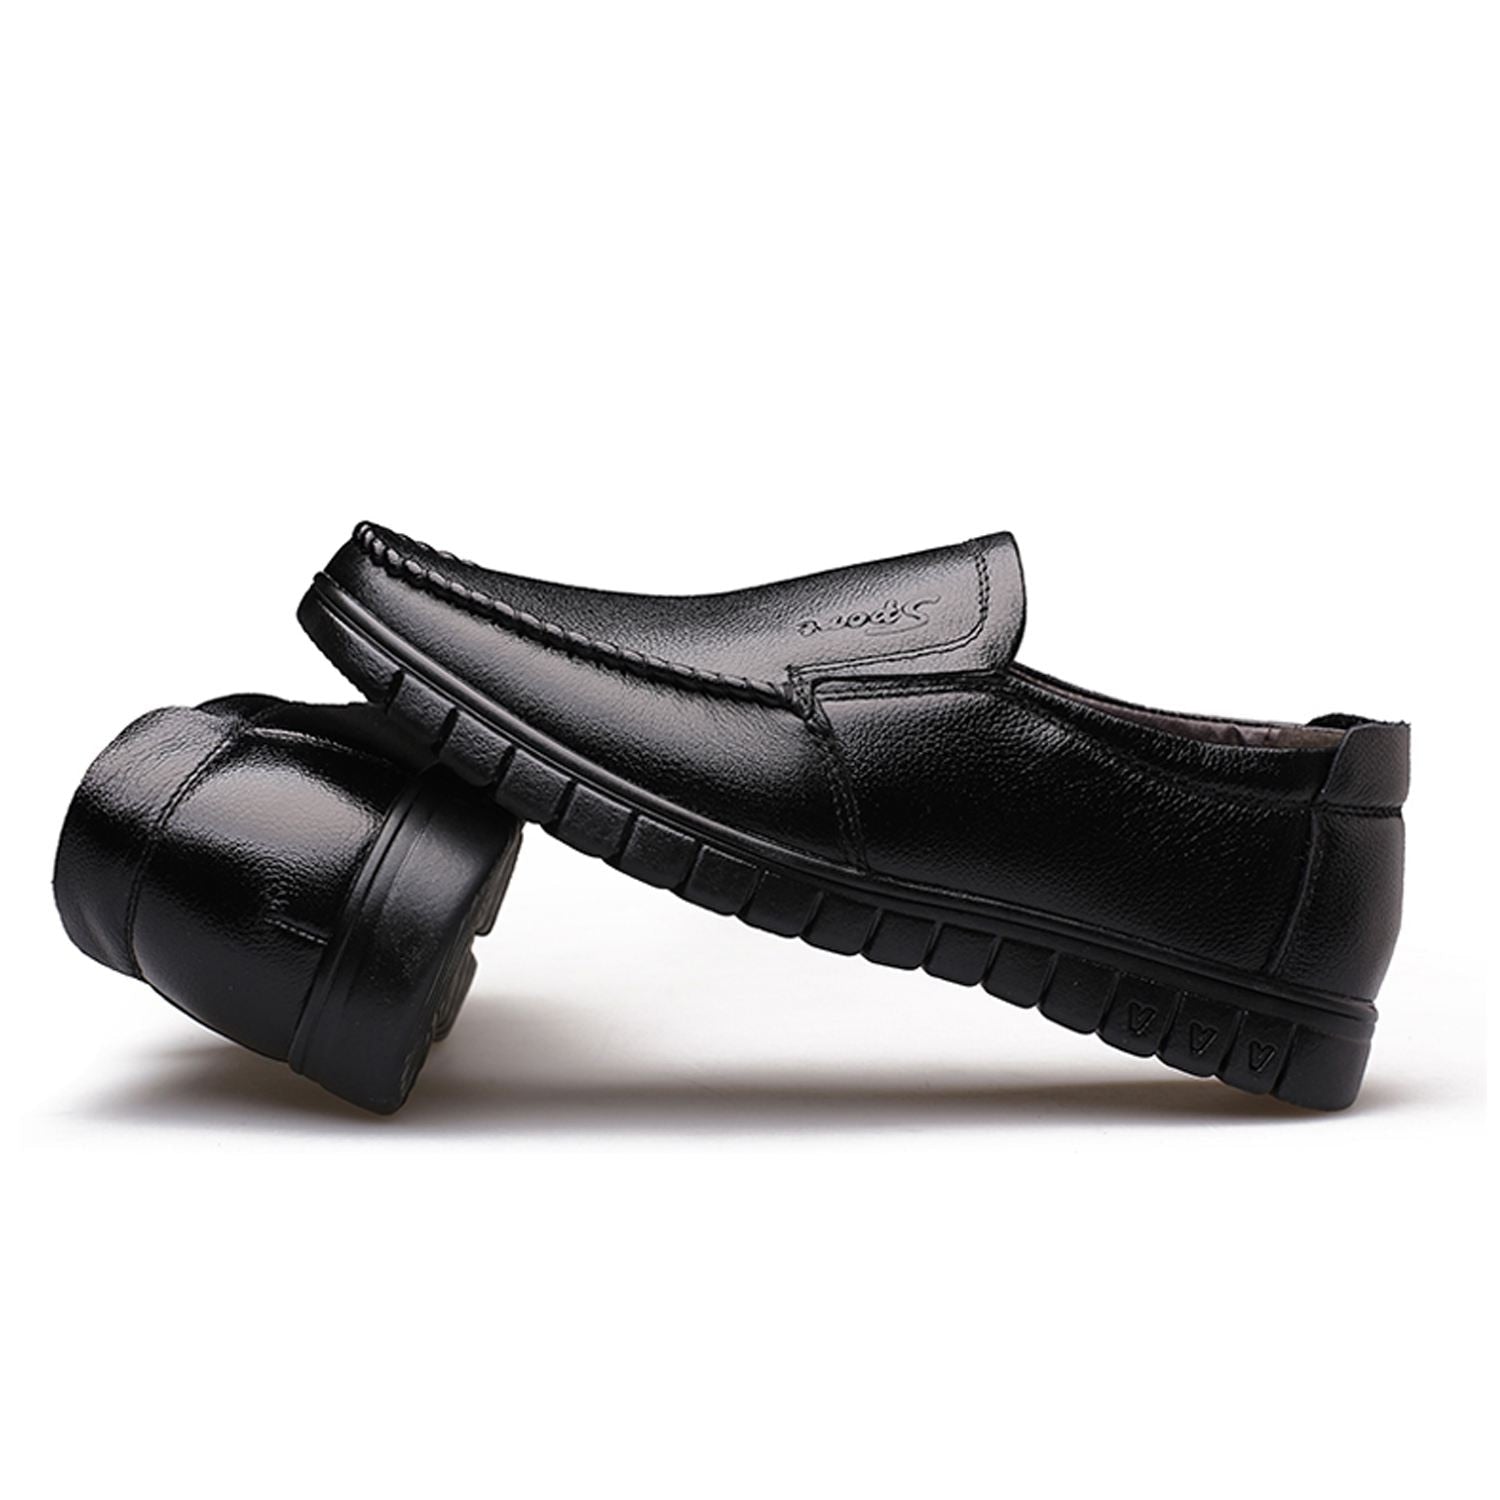 Men Soft Leather Loafers 2018 Spring Summer Male Casual Shoes Genuine Leather Moccasin Flat Breathable Driving Shoe - ebowsos